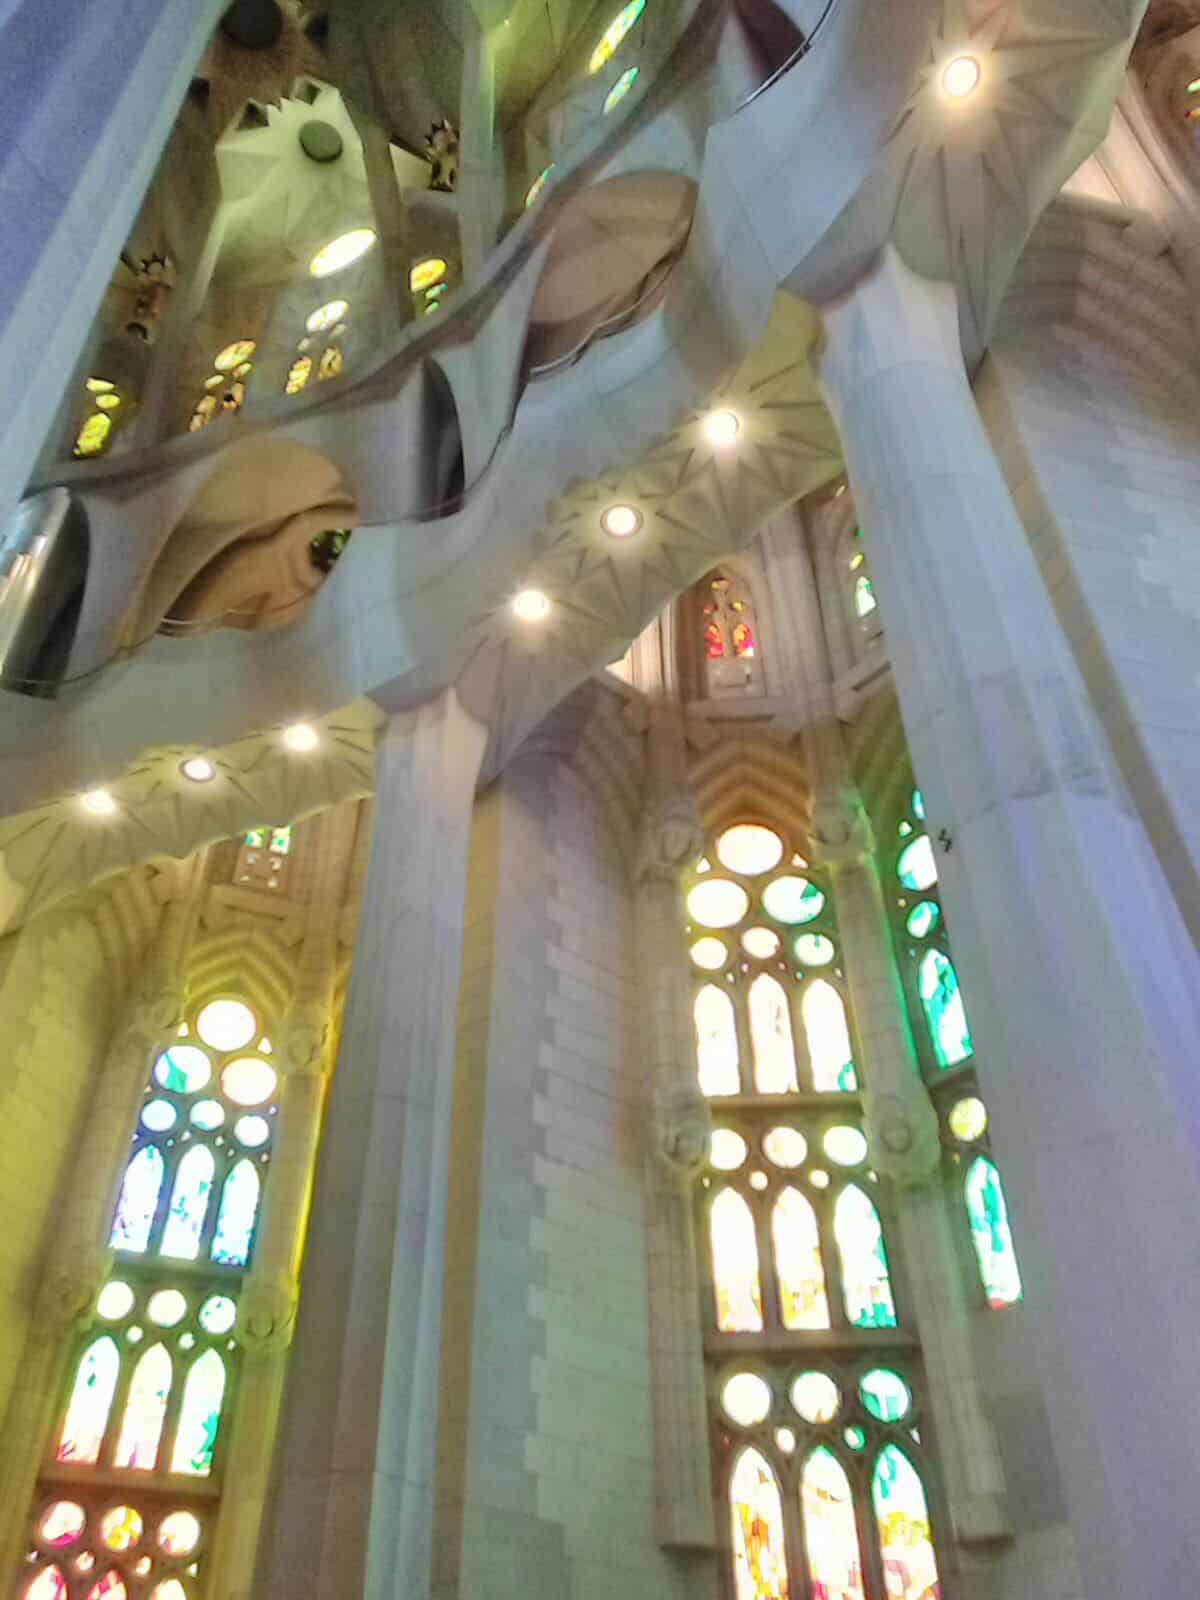 Stunning architecture and colorful lights inside the Sagrada Familia in Barcelona, Spain